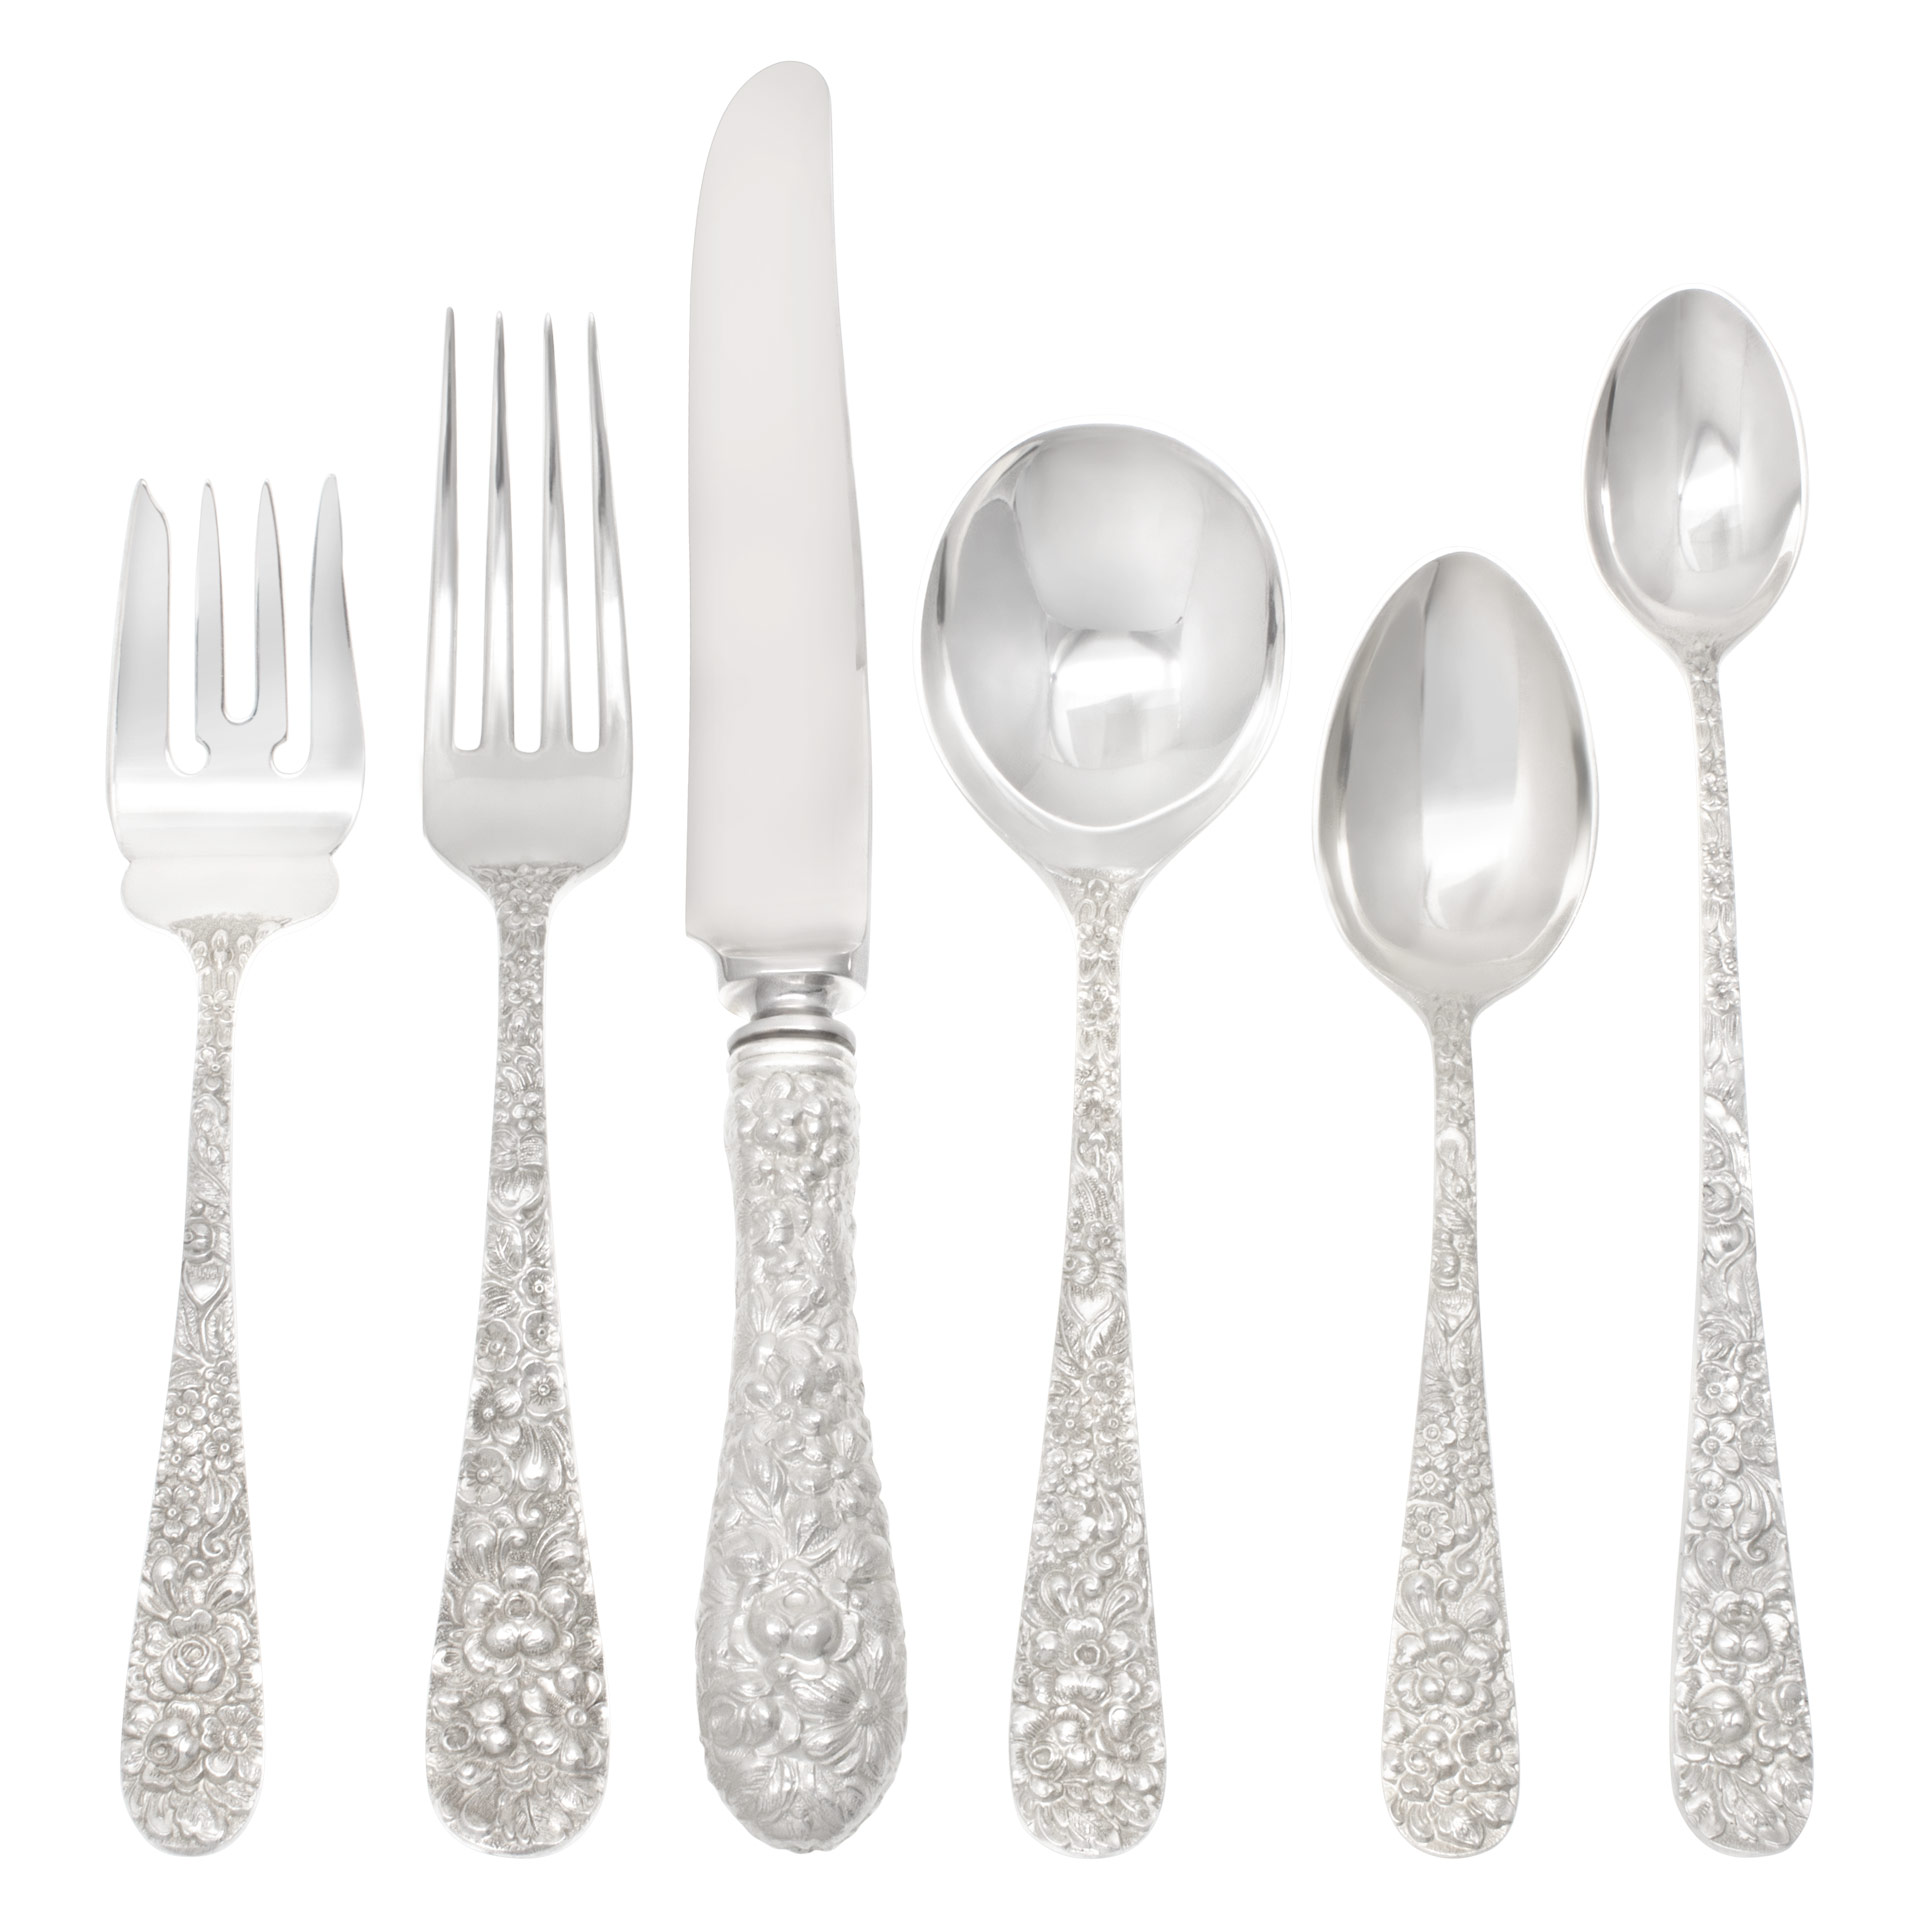 Antique "ROSE REPOUSSE" complete sterling silver flatware set patented  in 1892 by Stieff Sterling Silver Co. 6 place setting for 12 + 20 serving pieces. 92 pieces. 142 ounce troy sterling silver.